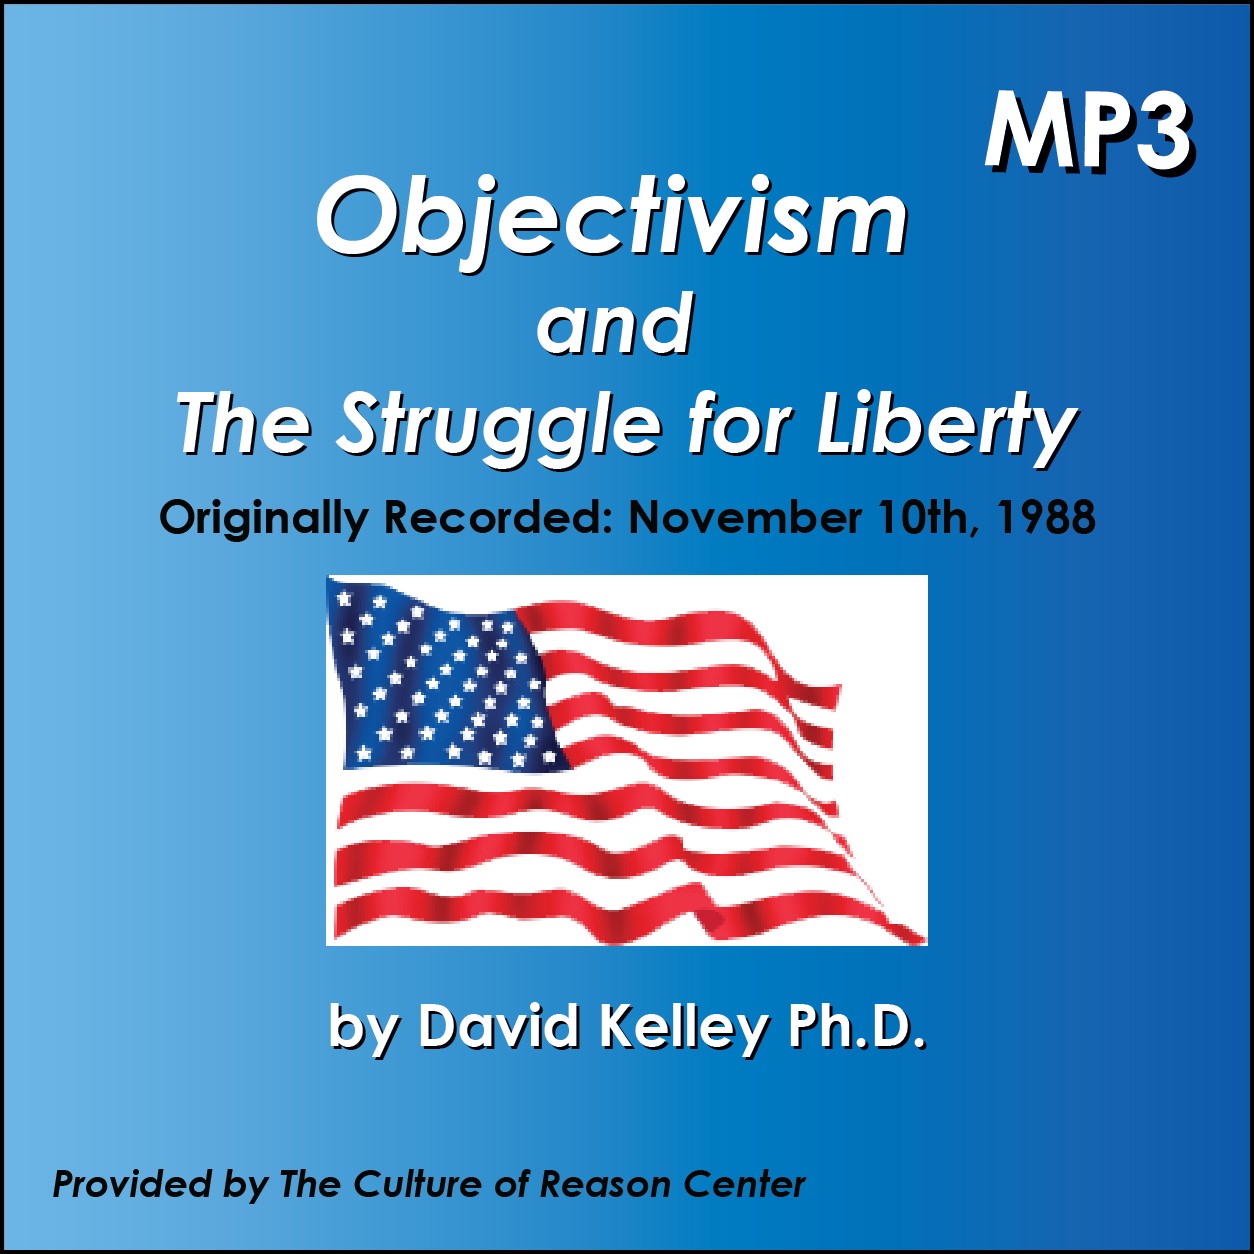 Objectivism and The Struggle for Liberty